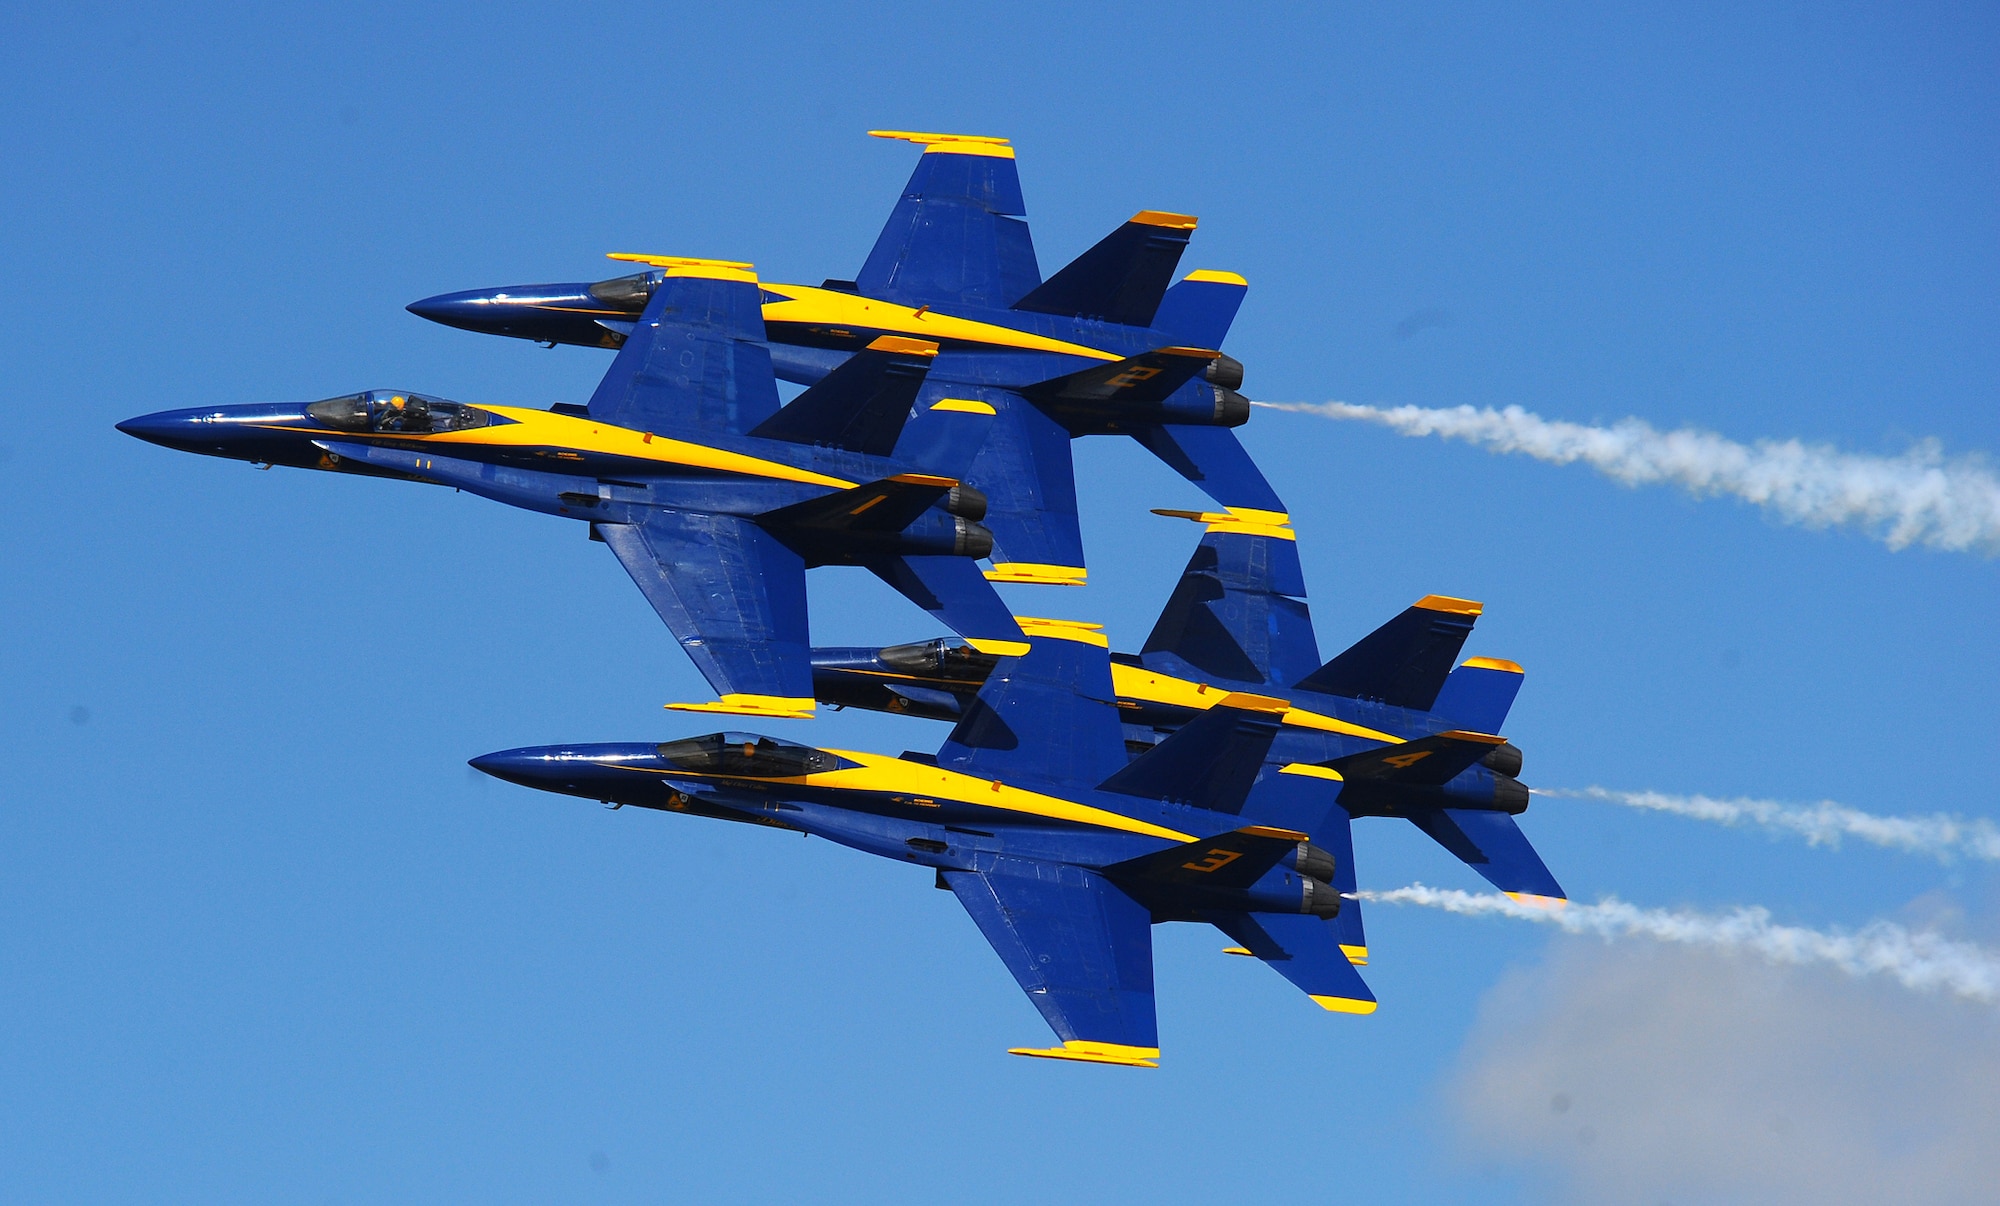 OFFUTT AIR FORCE BASE Neb. -- The U.S. Navy's Blue Angels, an F-18 demonstration team, perform breathtaking stunts in their famous diamond formation during the 2009 Defenders of Freedom Open House and Air Show here Aug. 29 - 30. U.S. Air Force Photo by Josh Plueger